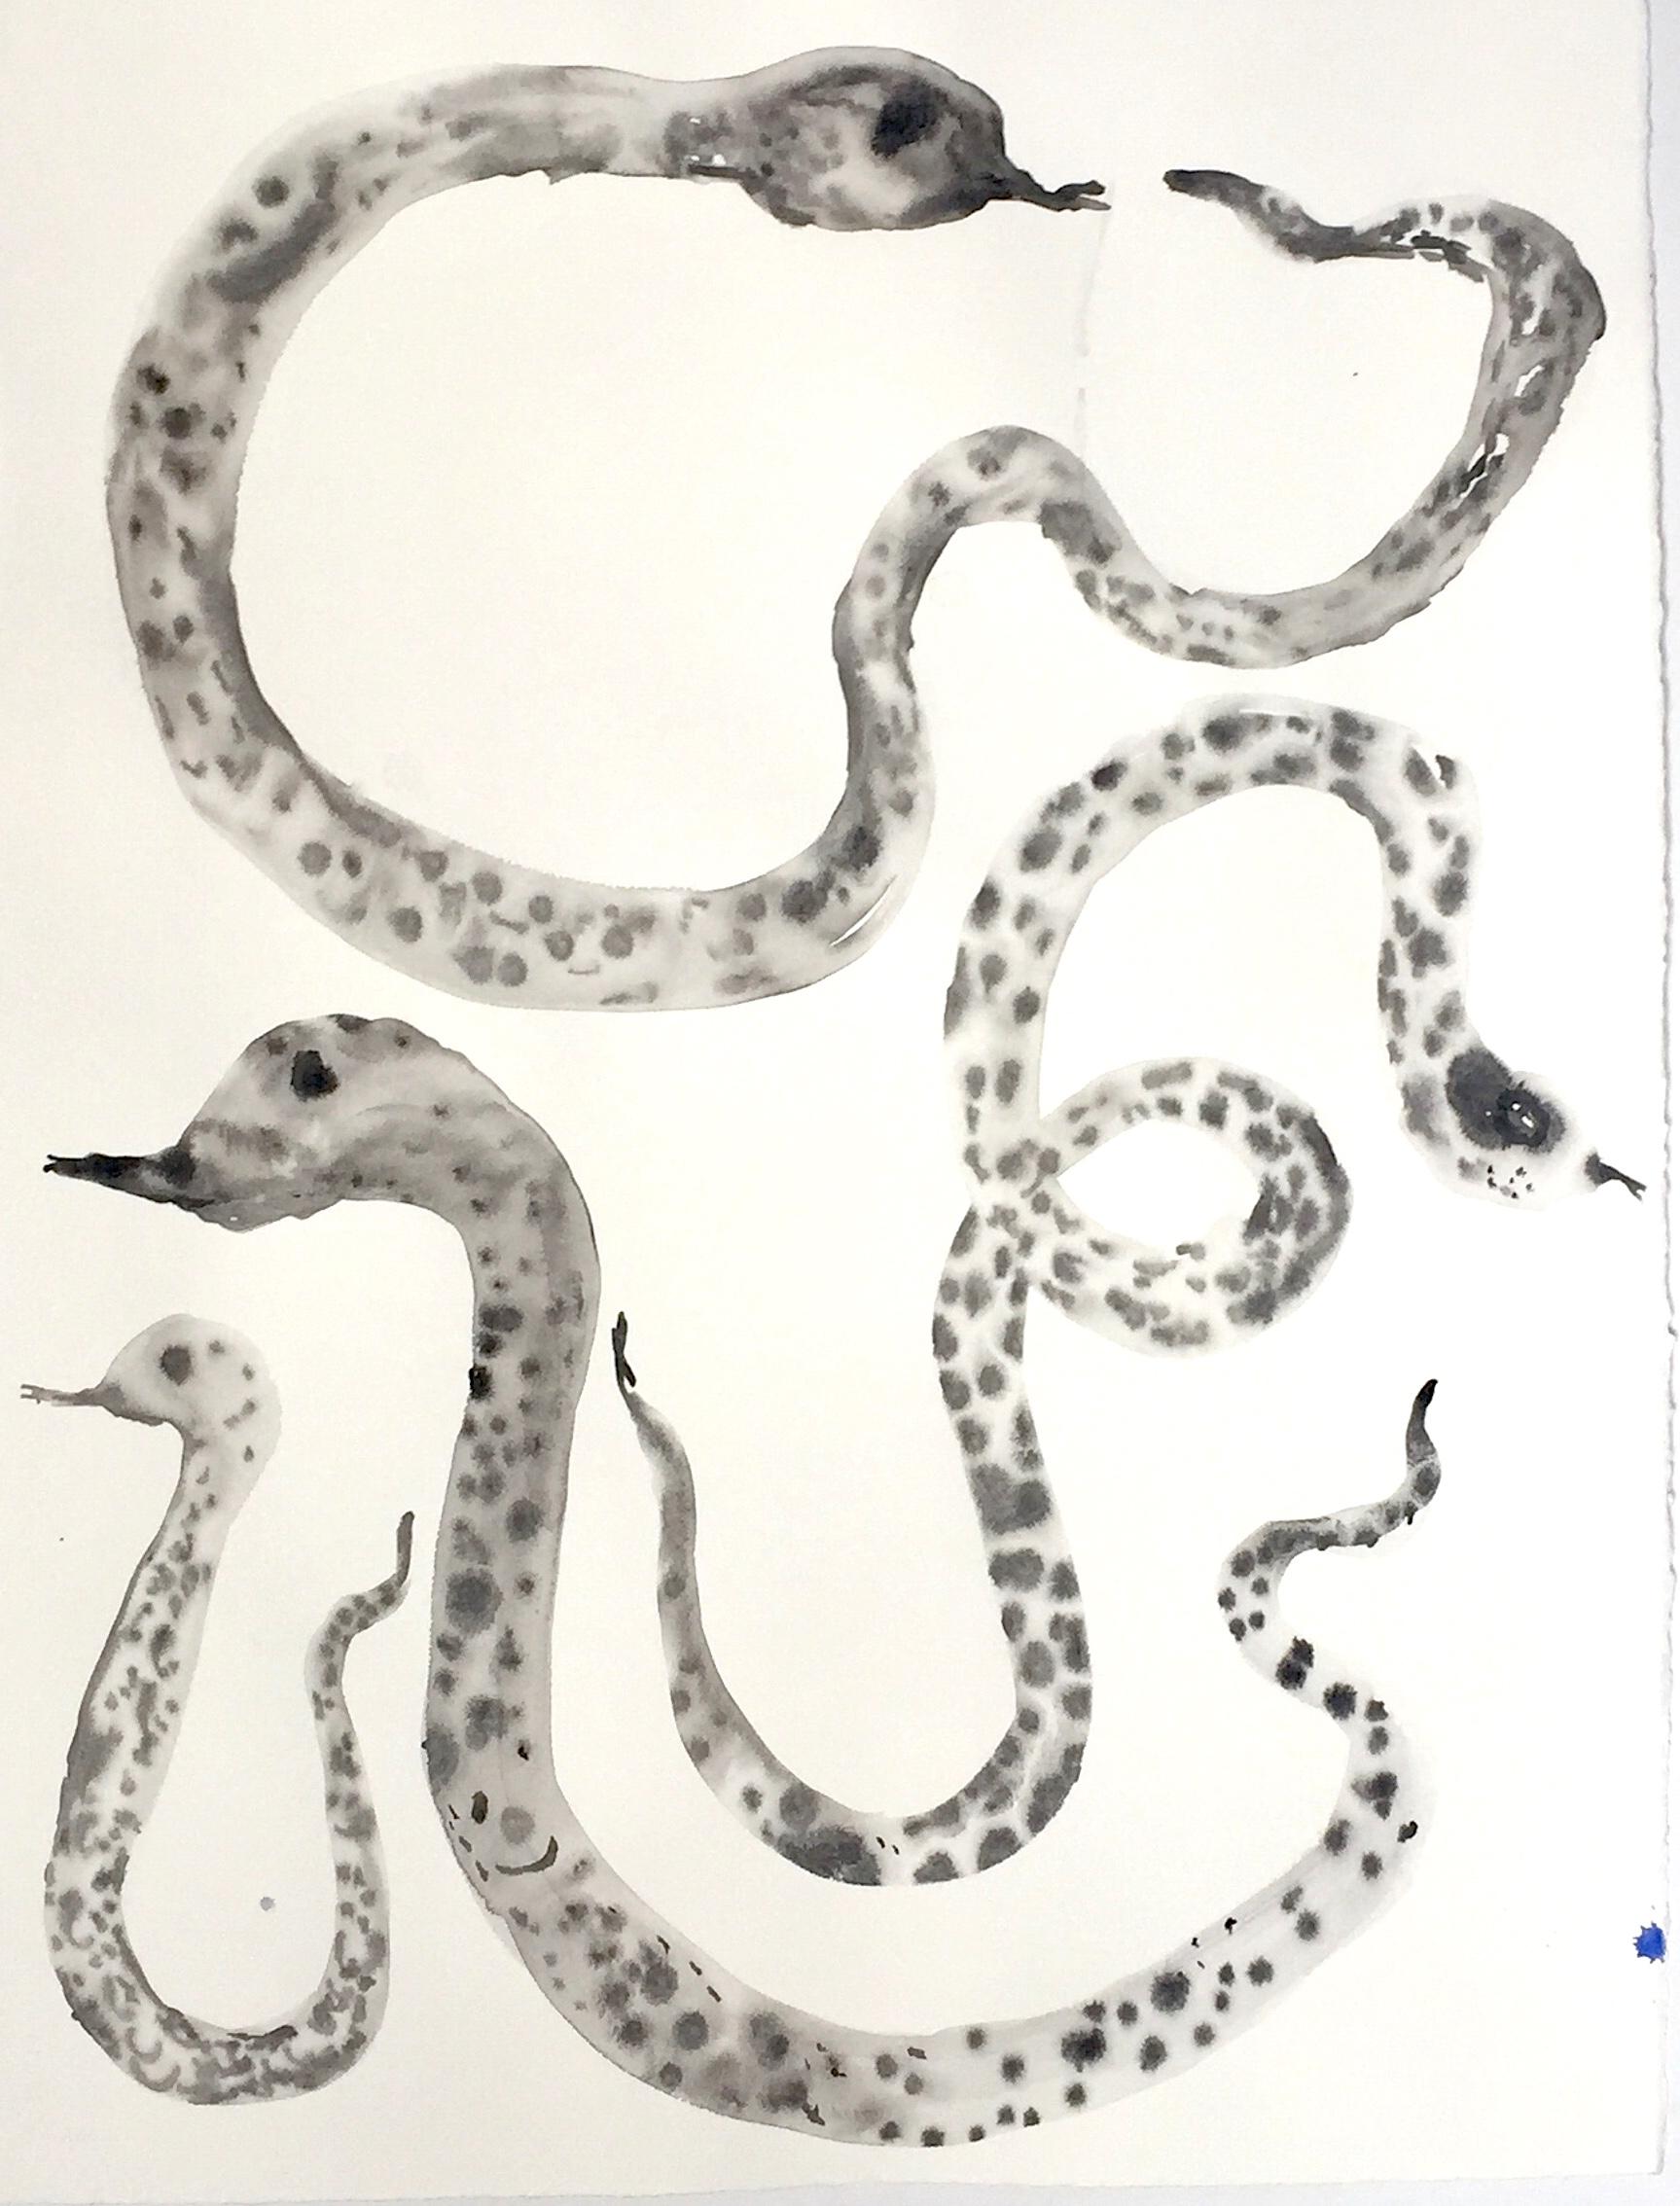 Nina Bovasso Figurative Painting - Black and White Snakes ink on Watercolor Paper